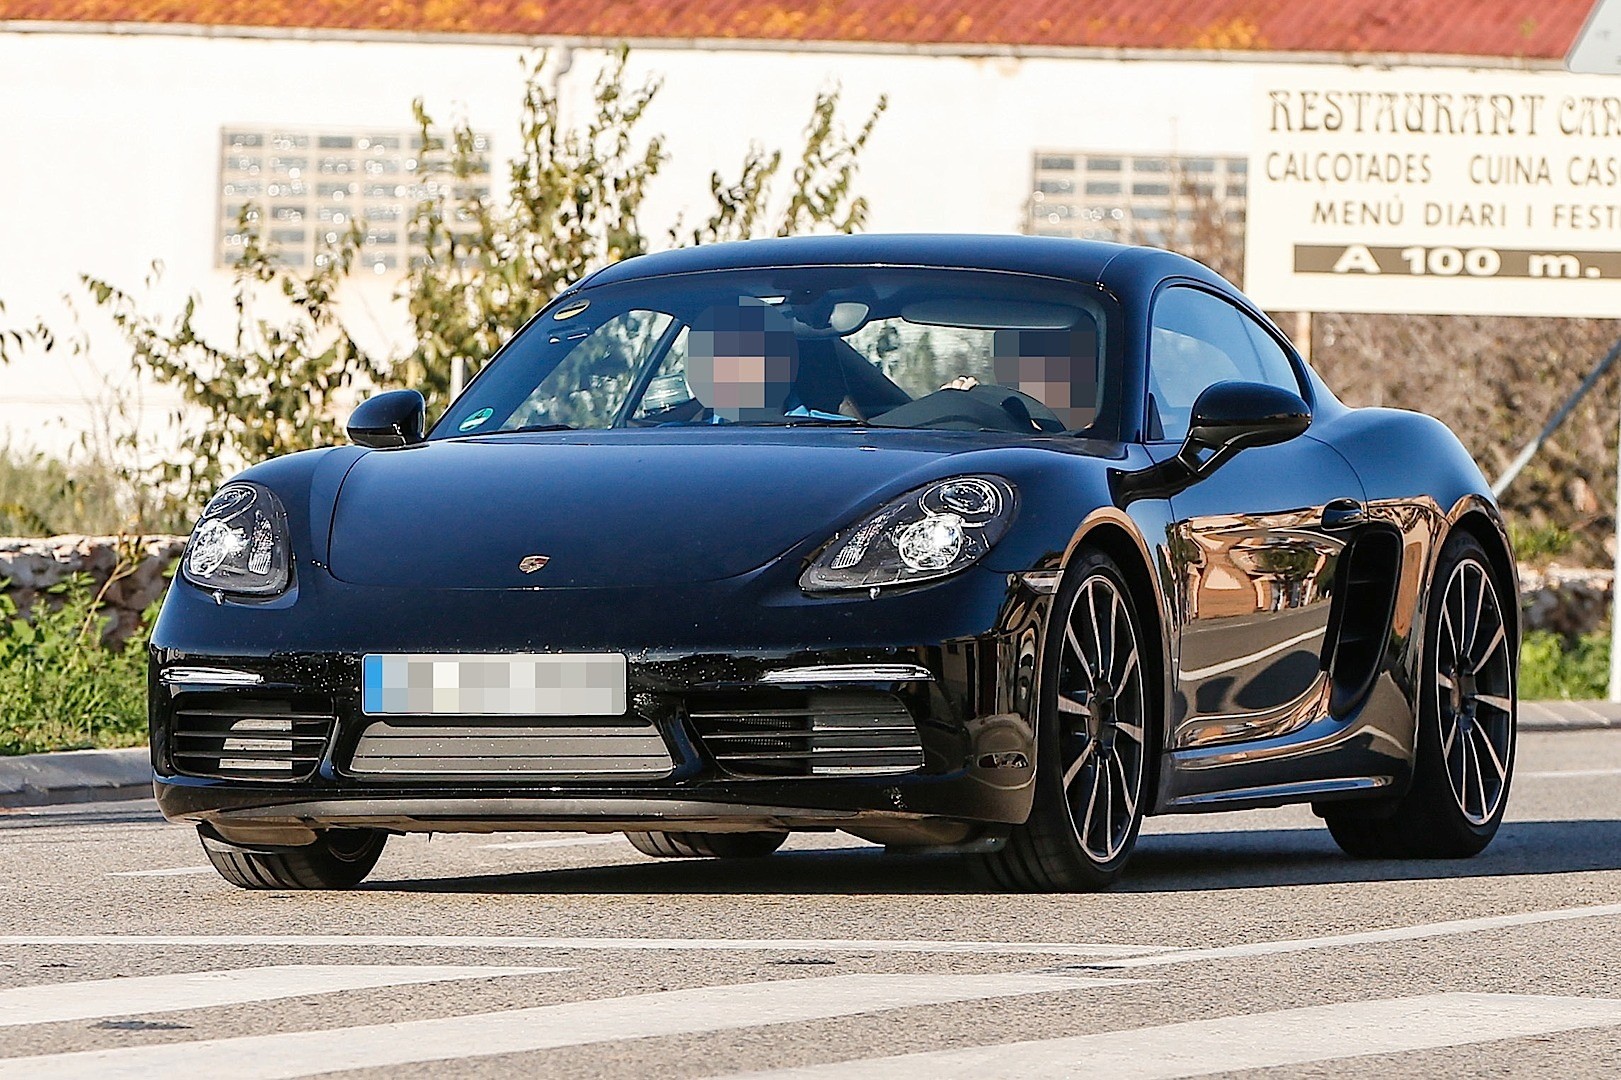 2017 Porsche Cayman Spied Naked While Testing Turbo Four Engines, Looks ... photo